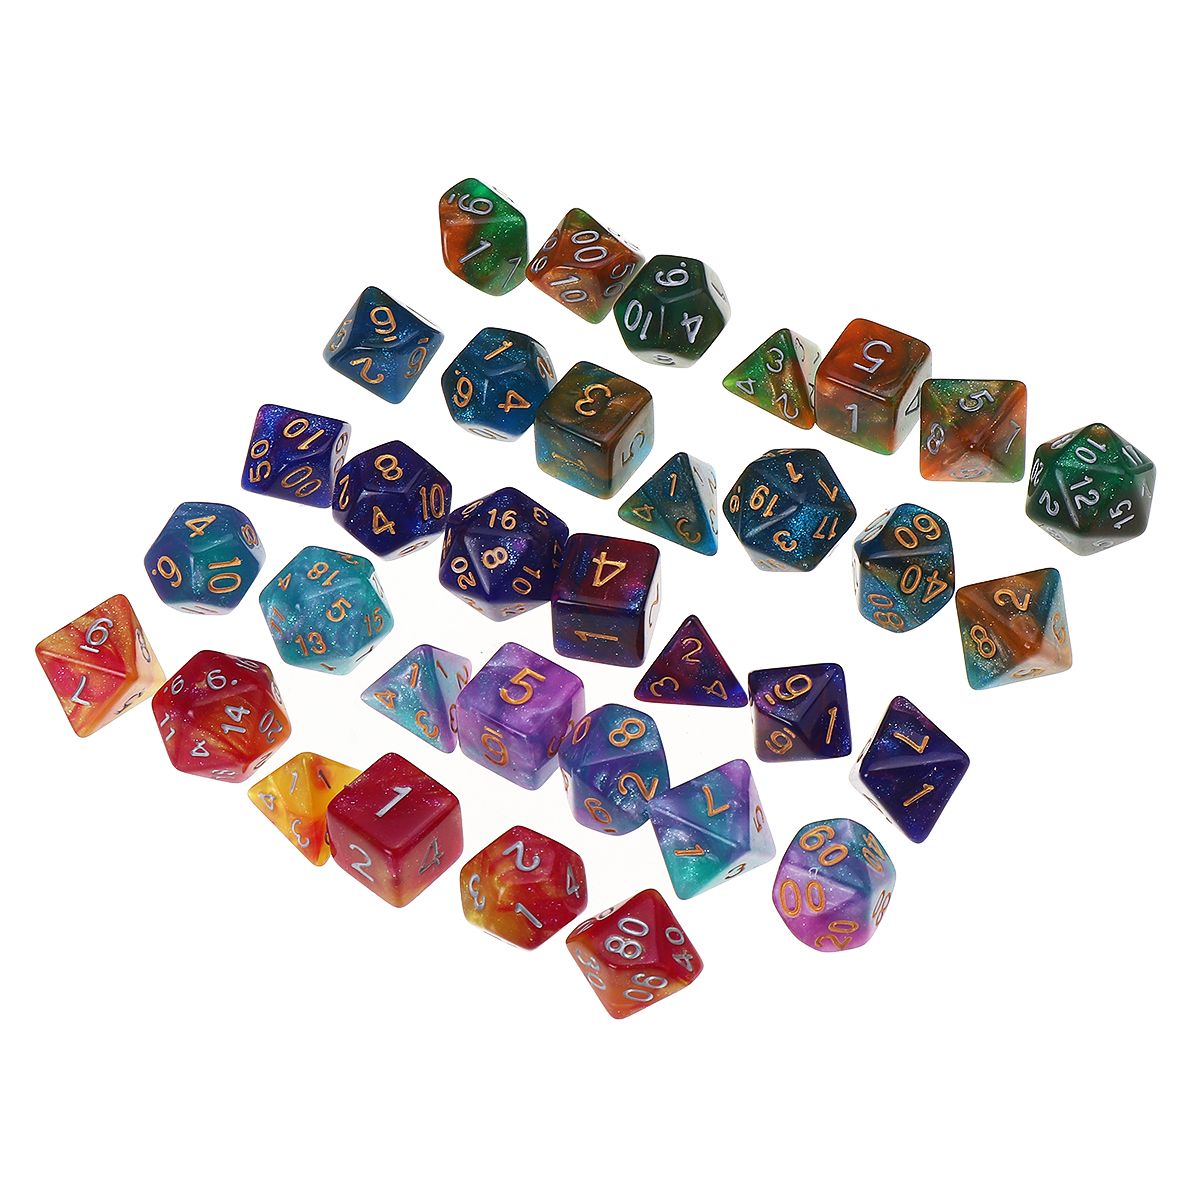 35pcs-Set-Polyhedral-Dices-DND-RPG-MTG-Role-Playing-Board-Game-Dices-Set-1623064